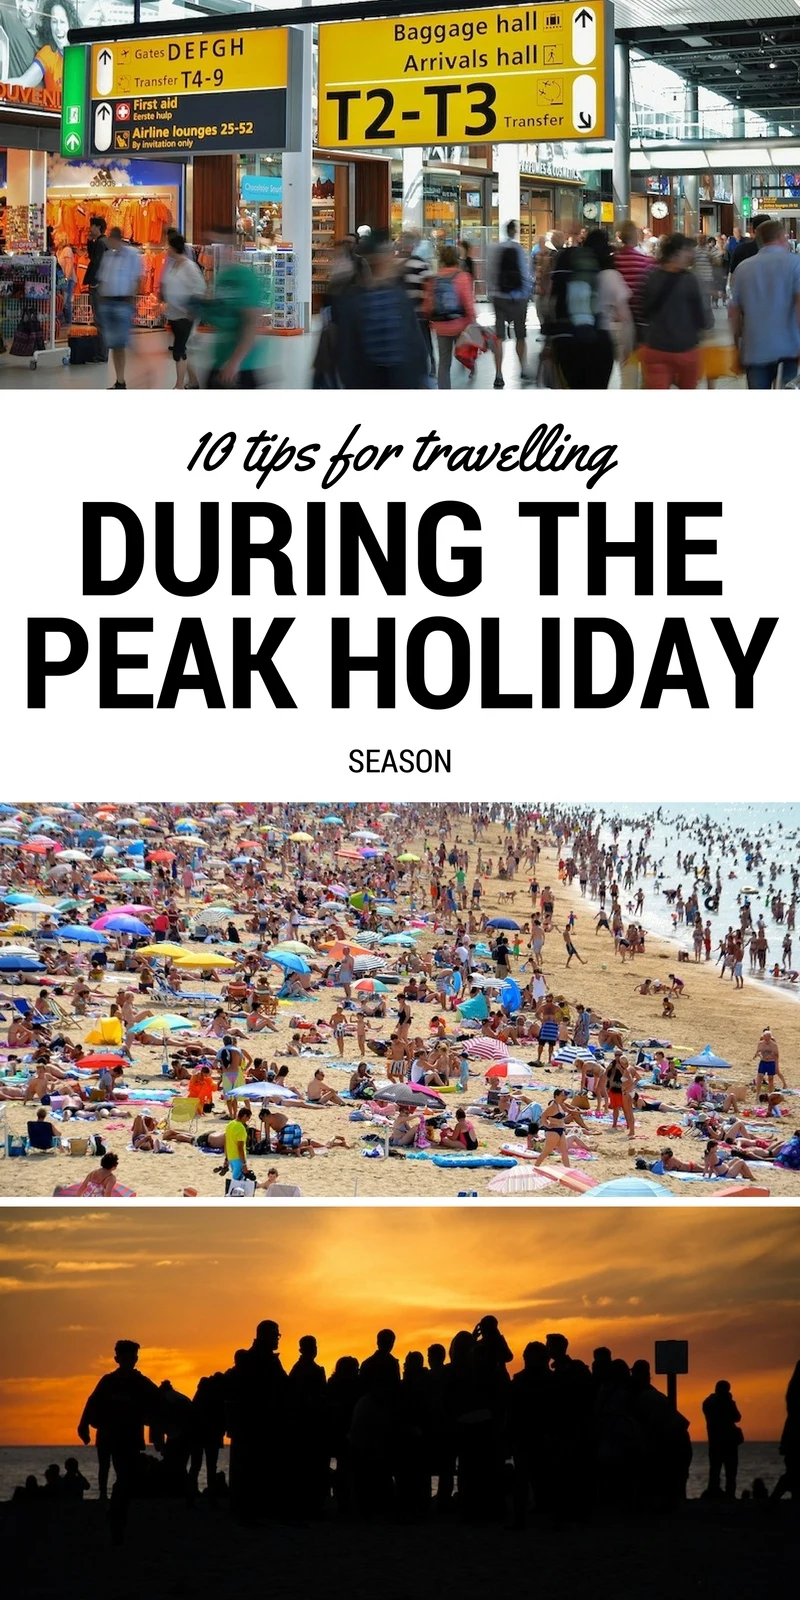 10 tips for travelling during the peak holiday season